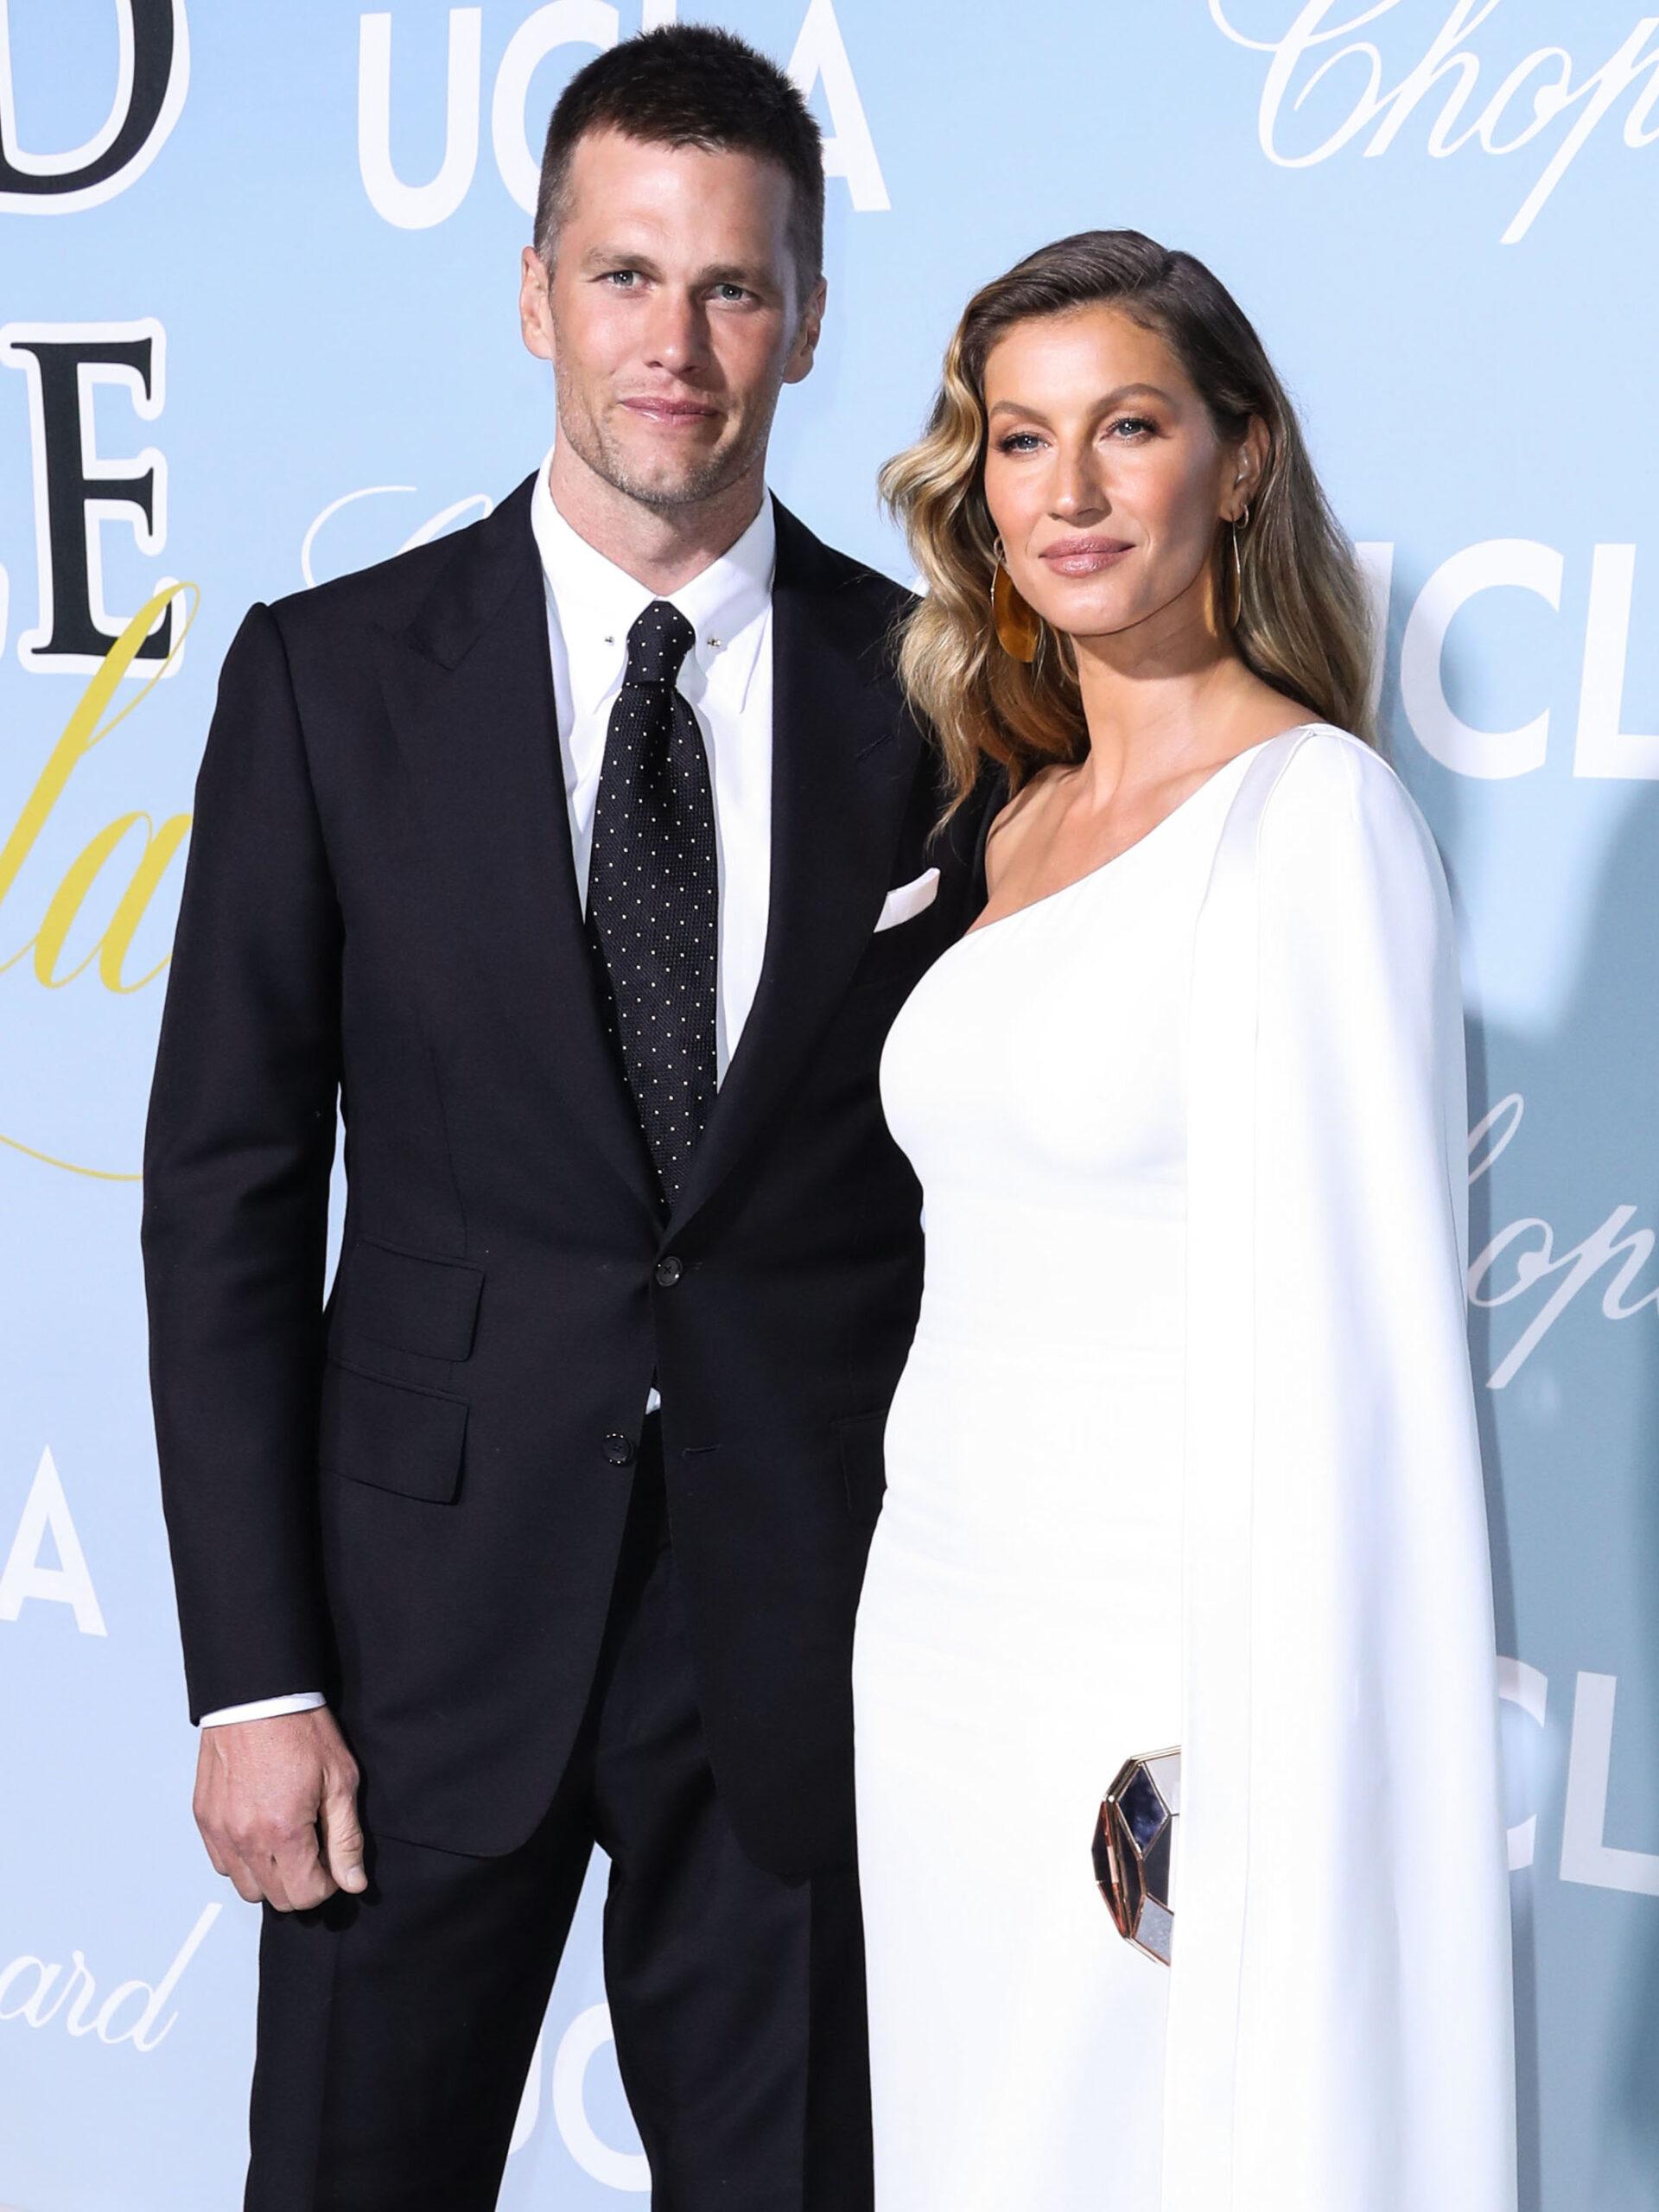 Gisele Bündchen & Tom Brady at the 2019 Hollywood For Science Gala